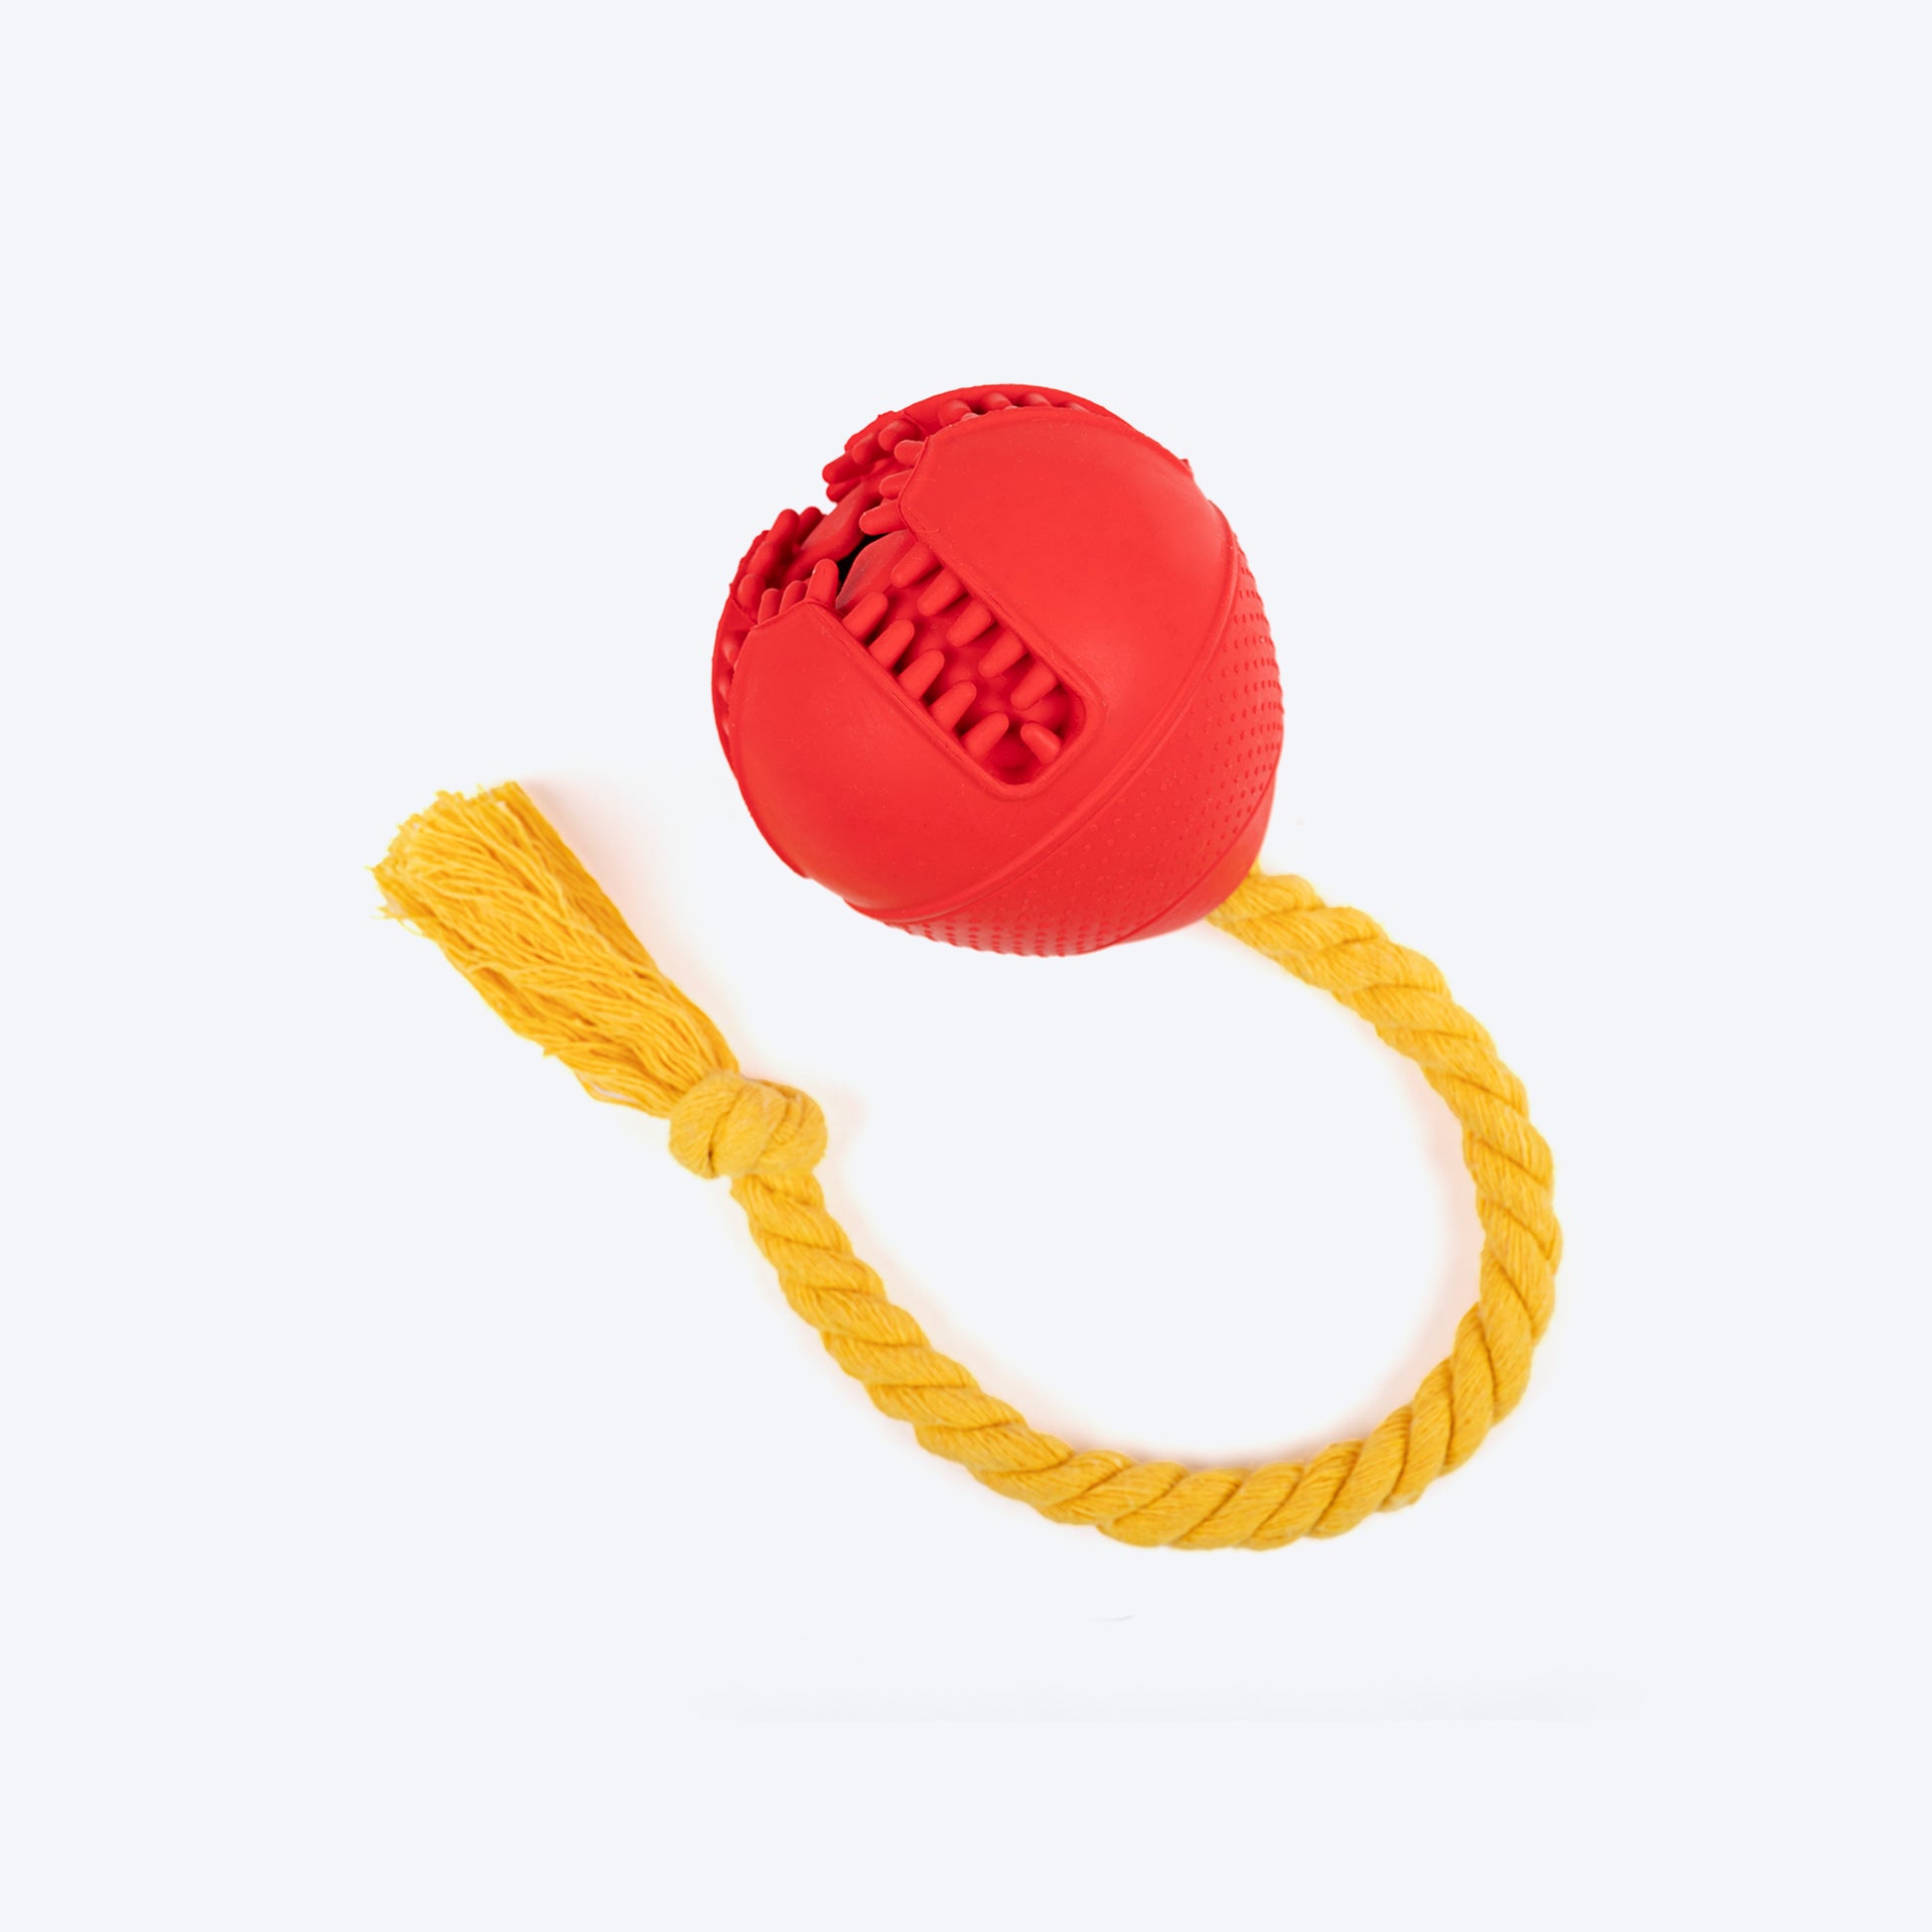 HUFT Roll-N-Chew Toy For Dog - Red & Yellow - Heads Up For Tails